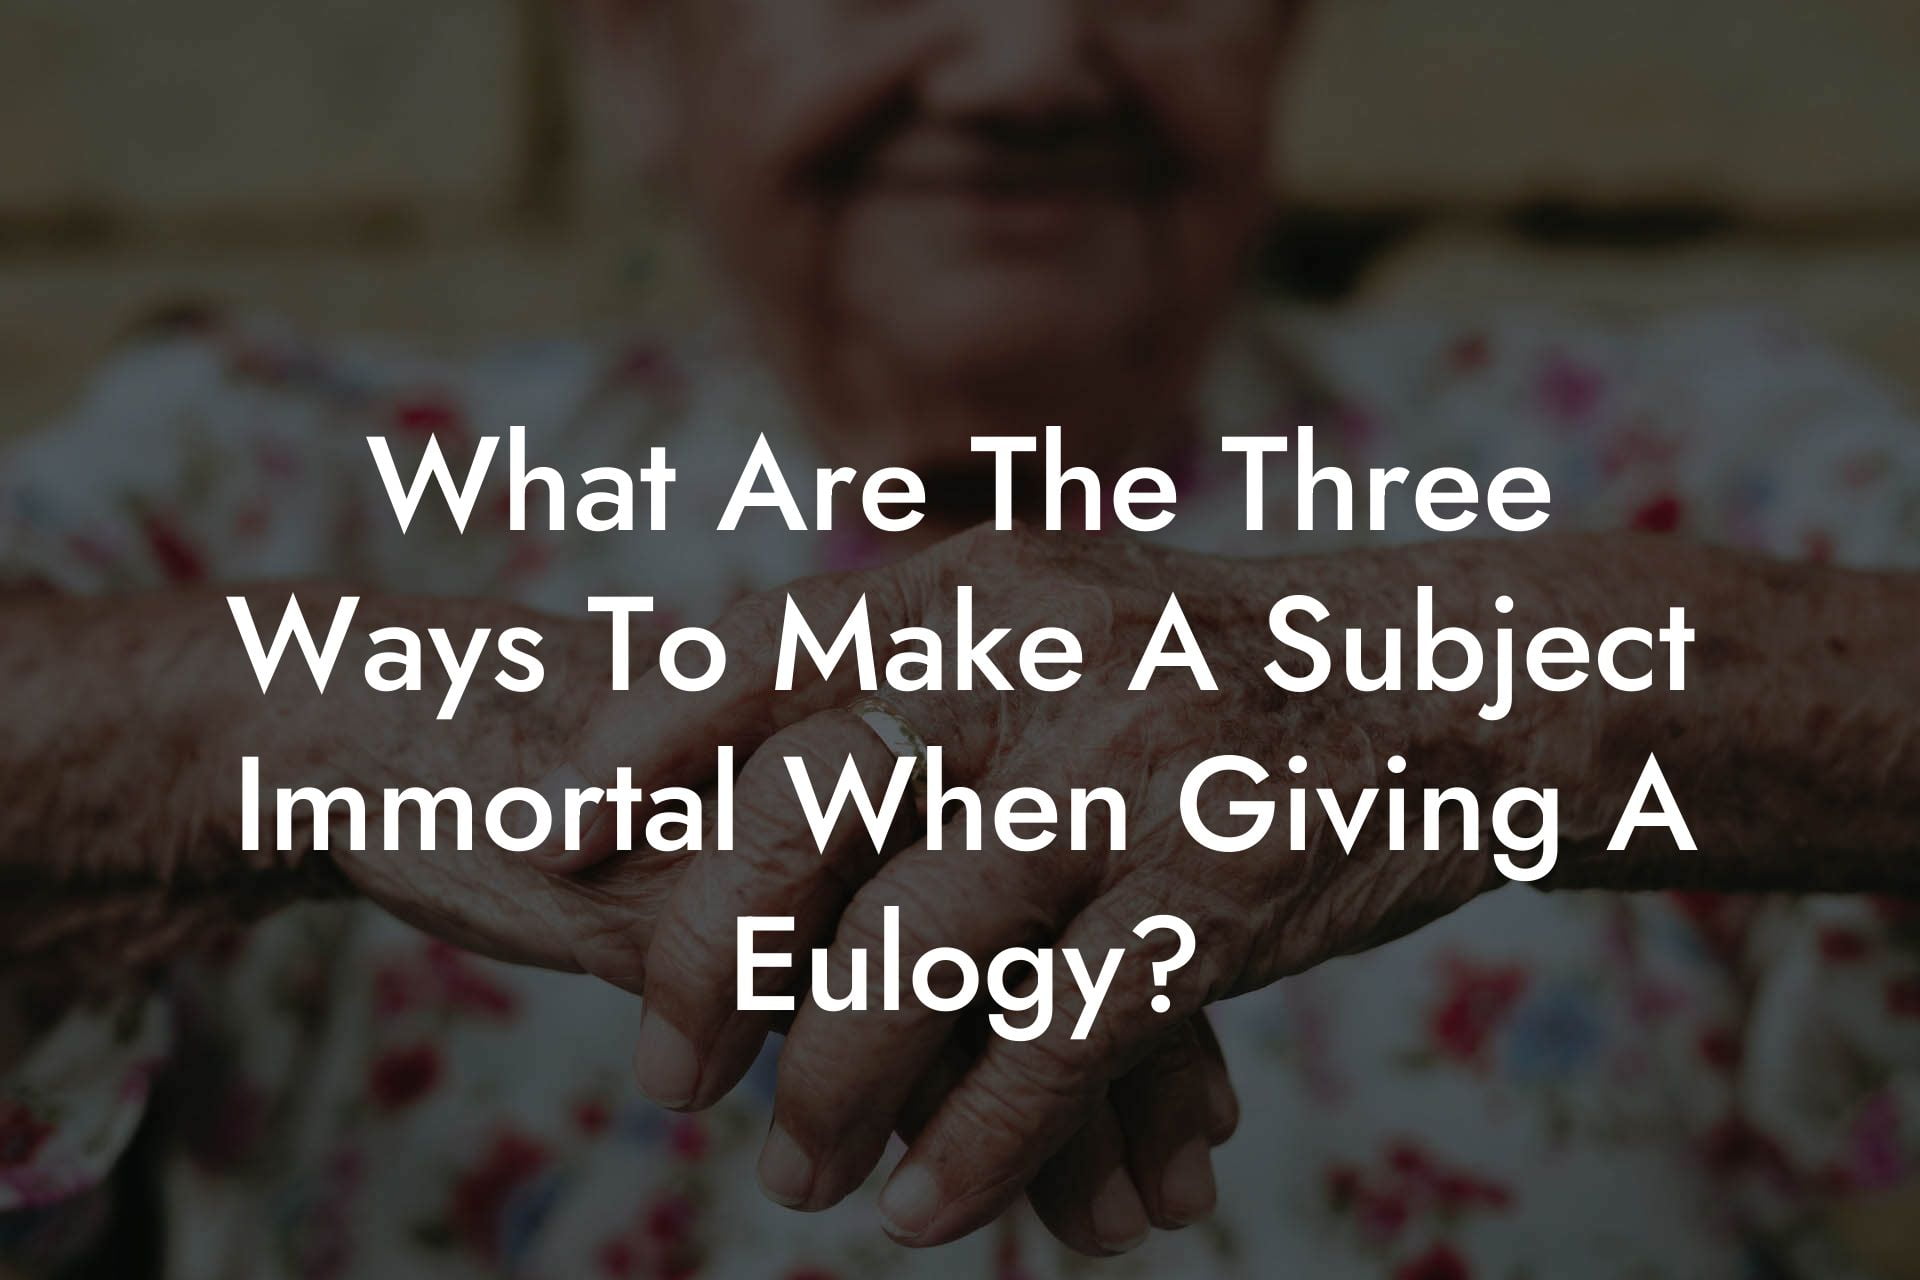 What Are The Three Ways To Make A Subject Immortal When Giving A Eulogy?